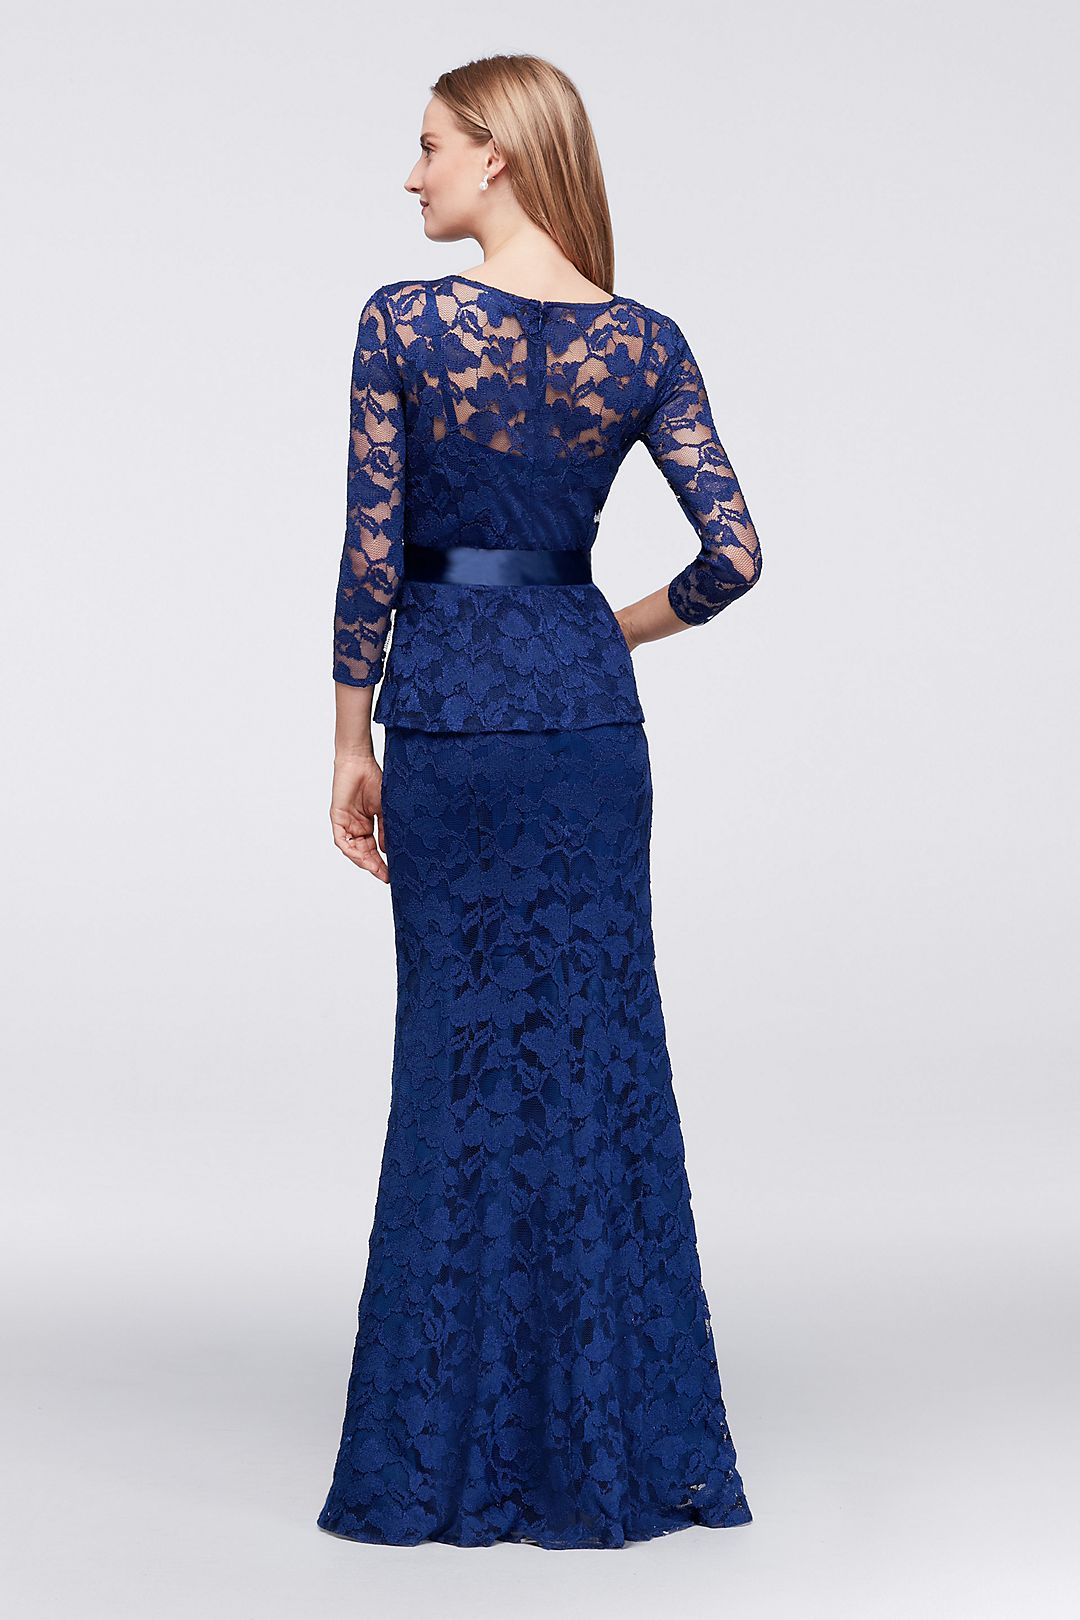 Mock 2-Piece Gown with Illusion Lace Neckline Image 4